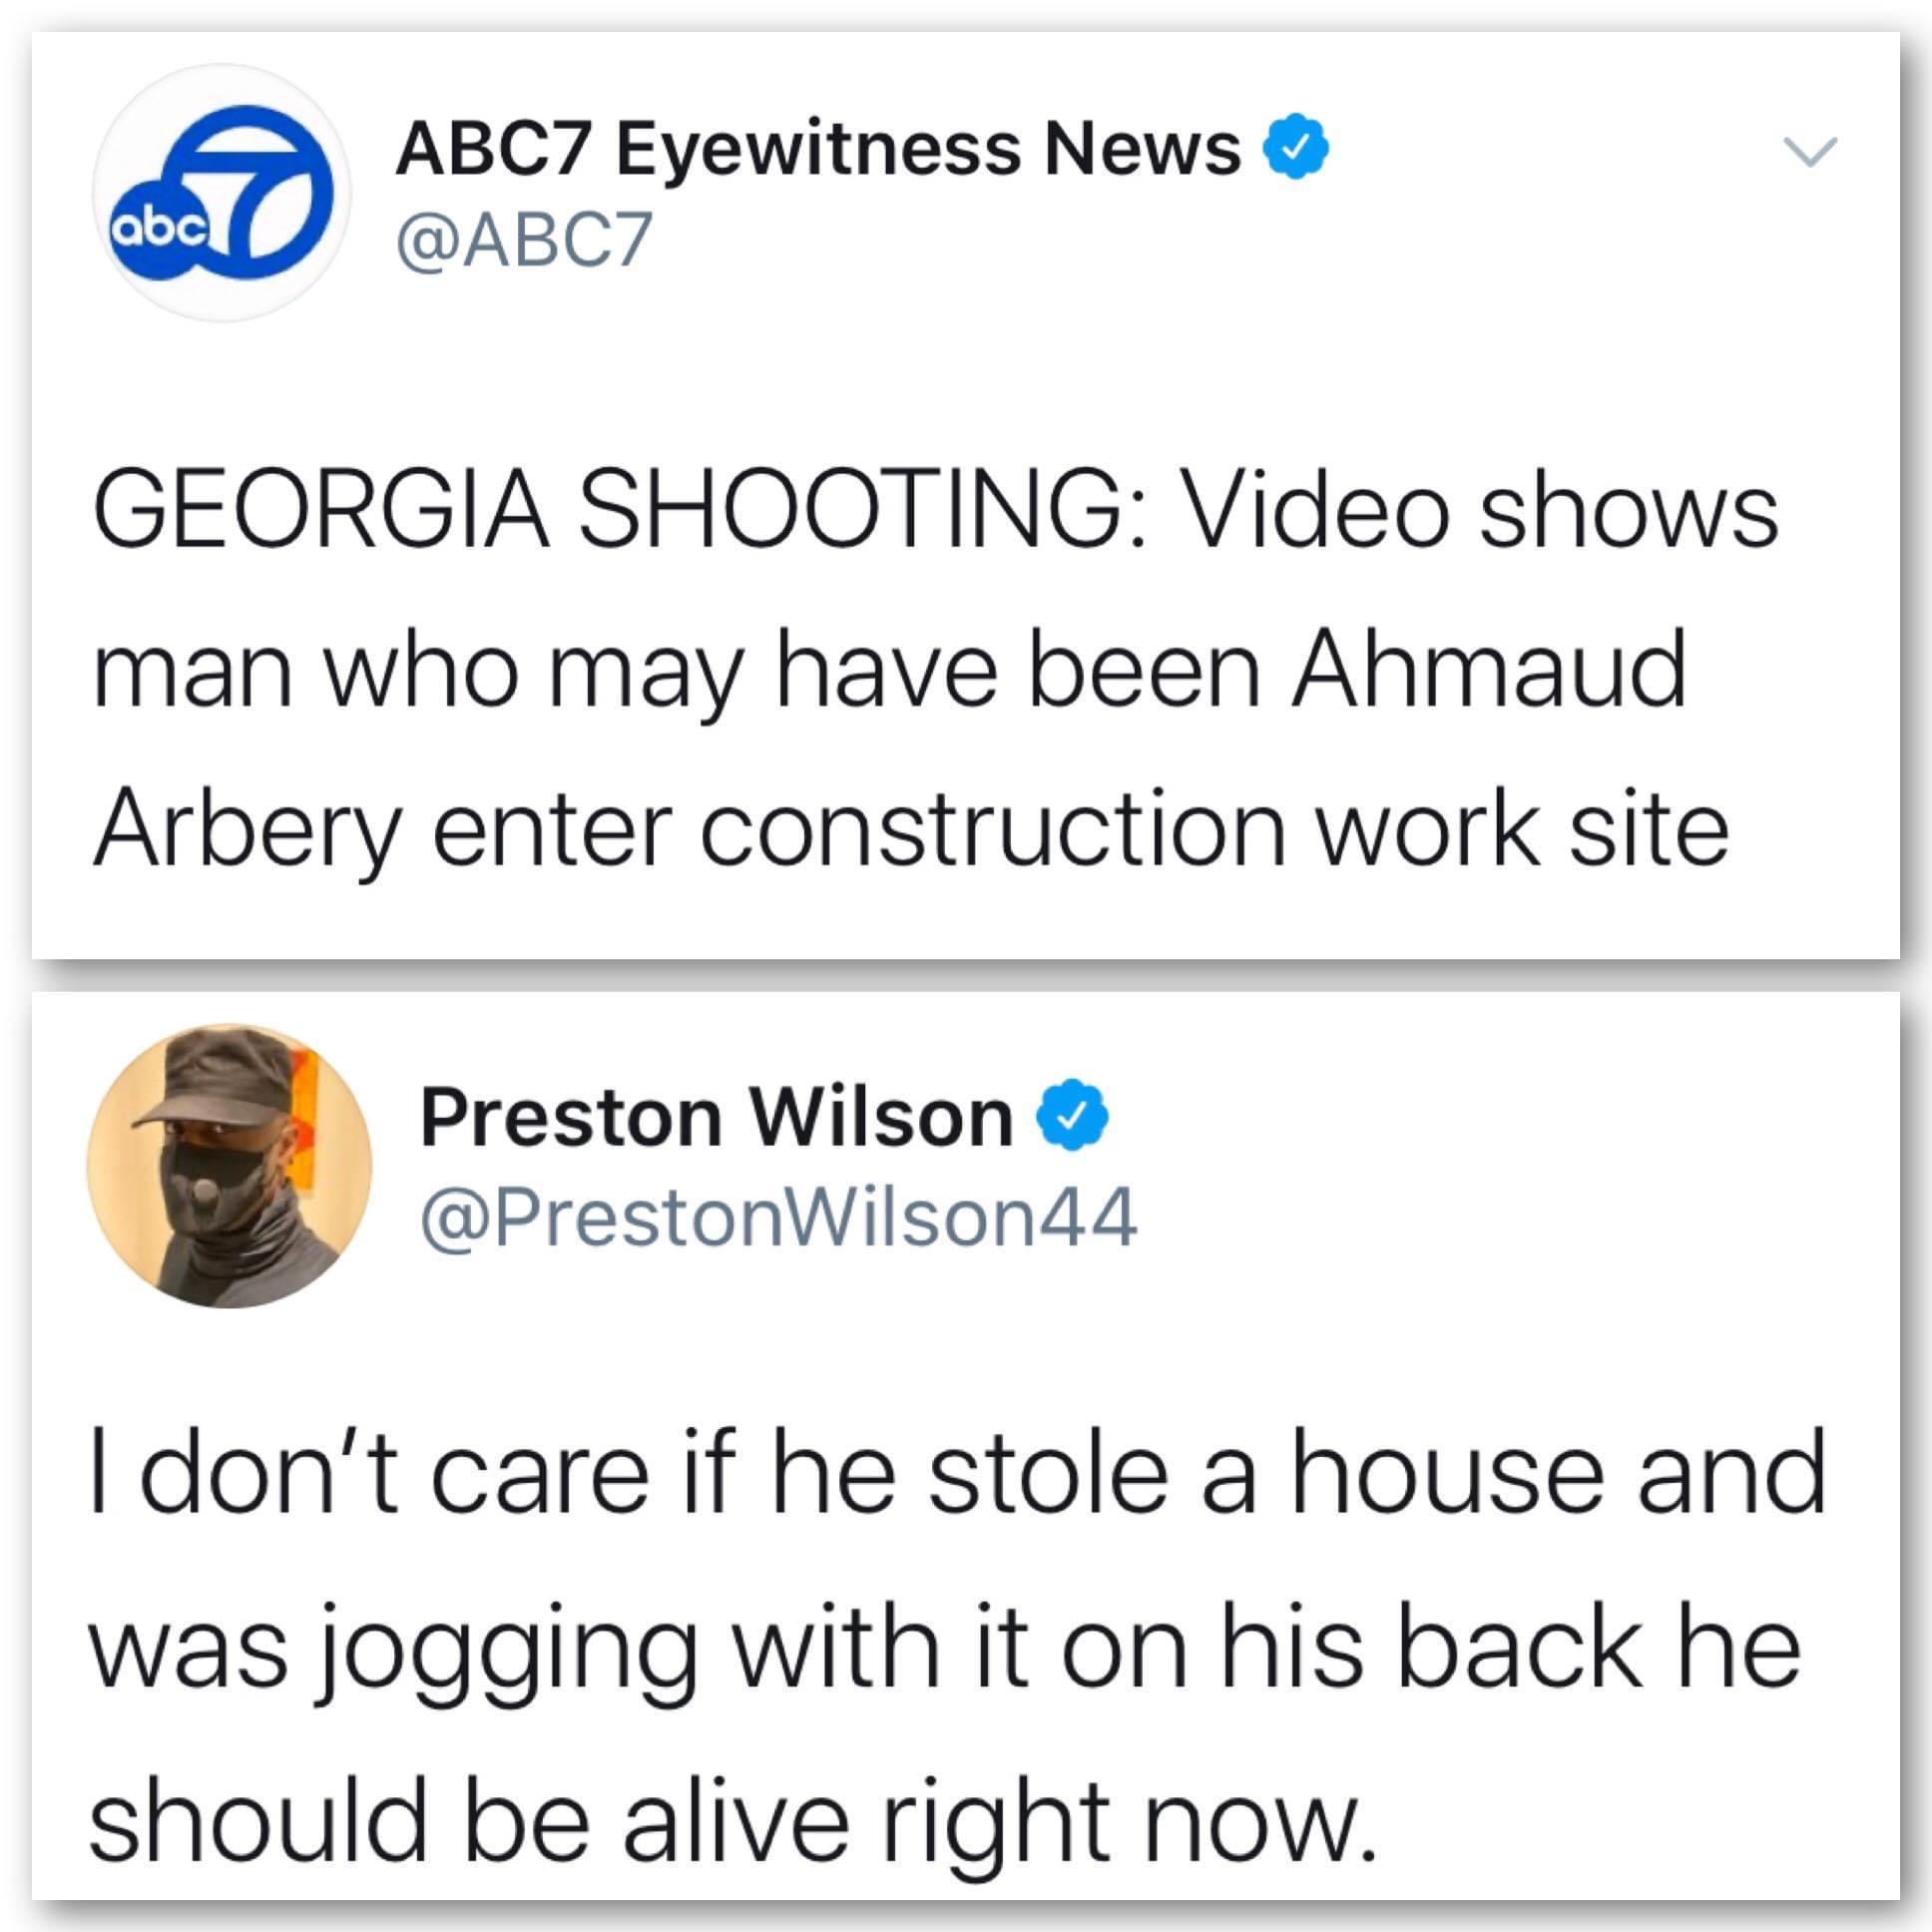 Tweets, Ahmaud, Jury, Georgia, February, Executioner Black Twitter Memes Tweets, Ahmaud, Jury, Georgia, February, Executioner text: A ABC7 Eyewitness News obc @ABC7 GEORGIA SHOOTING: Video shows man who may have been Ahmaud Arbery enter construction work site Preston Wilson @PrestonWilson44 I don't care if he stole a house and was jogging with it on his back he should be alive right now. 